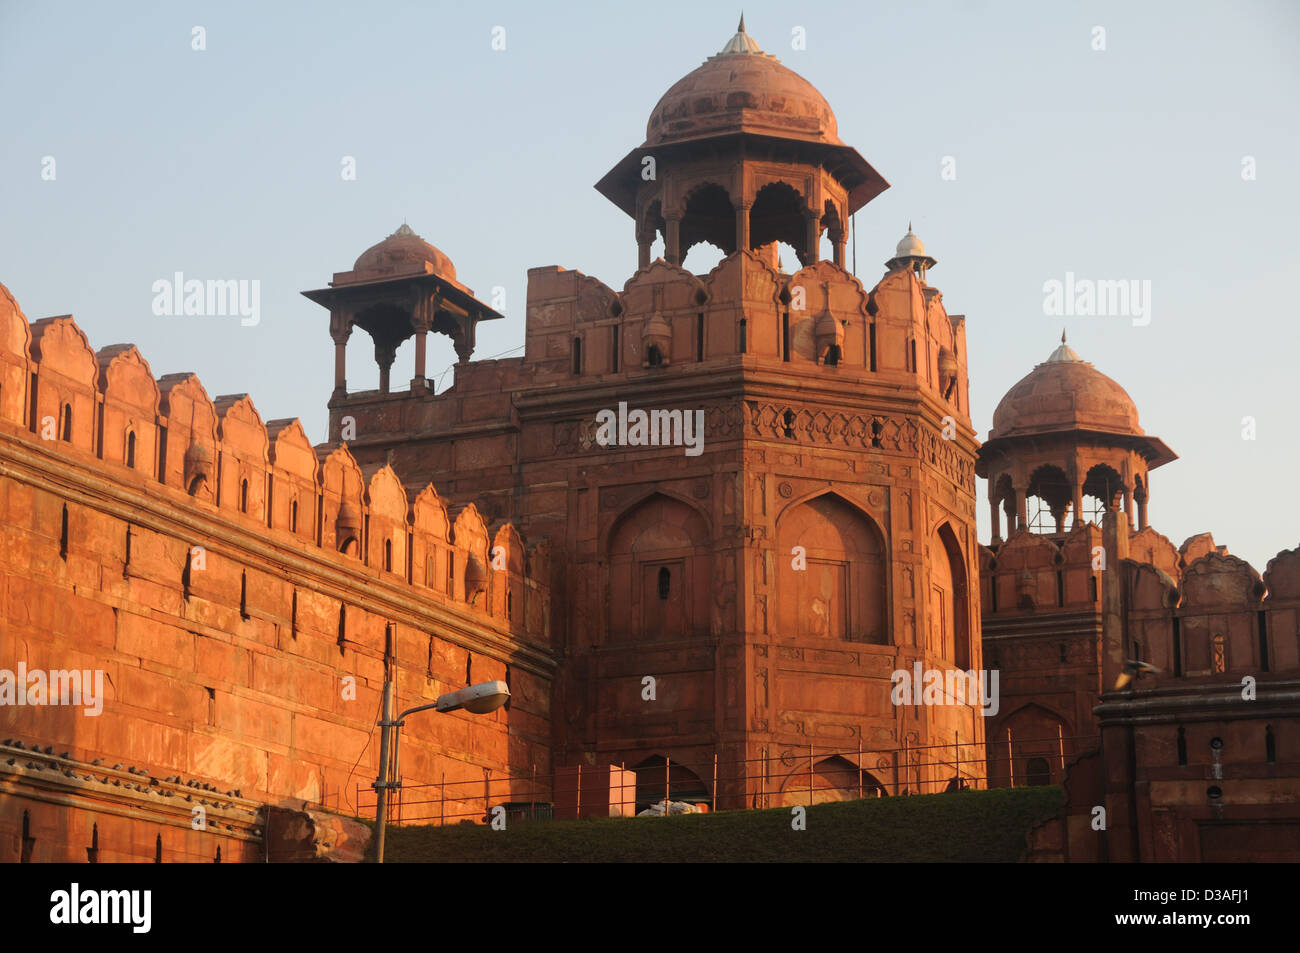 The Red Fort Delhi, India Stock Photo